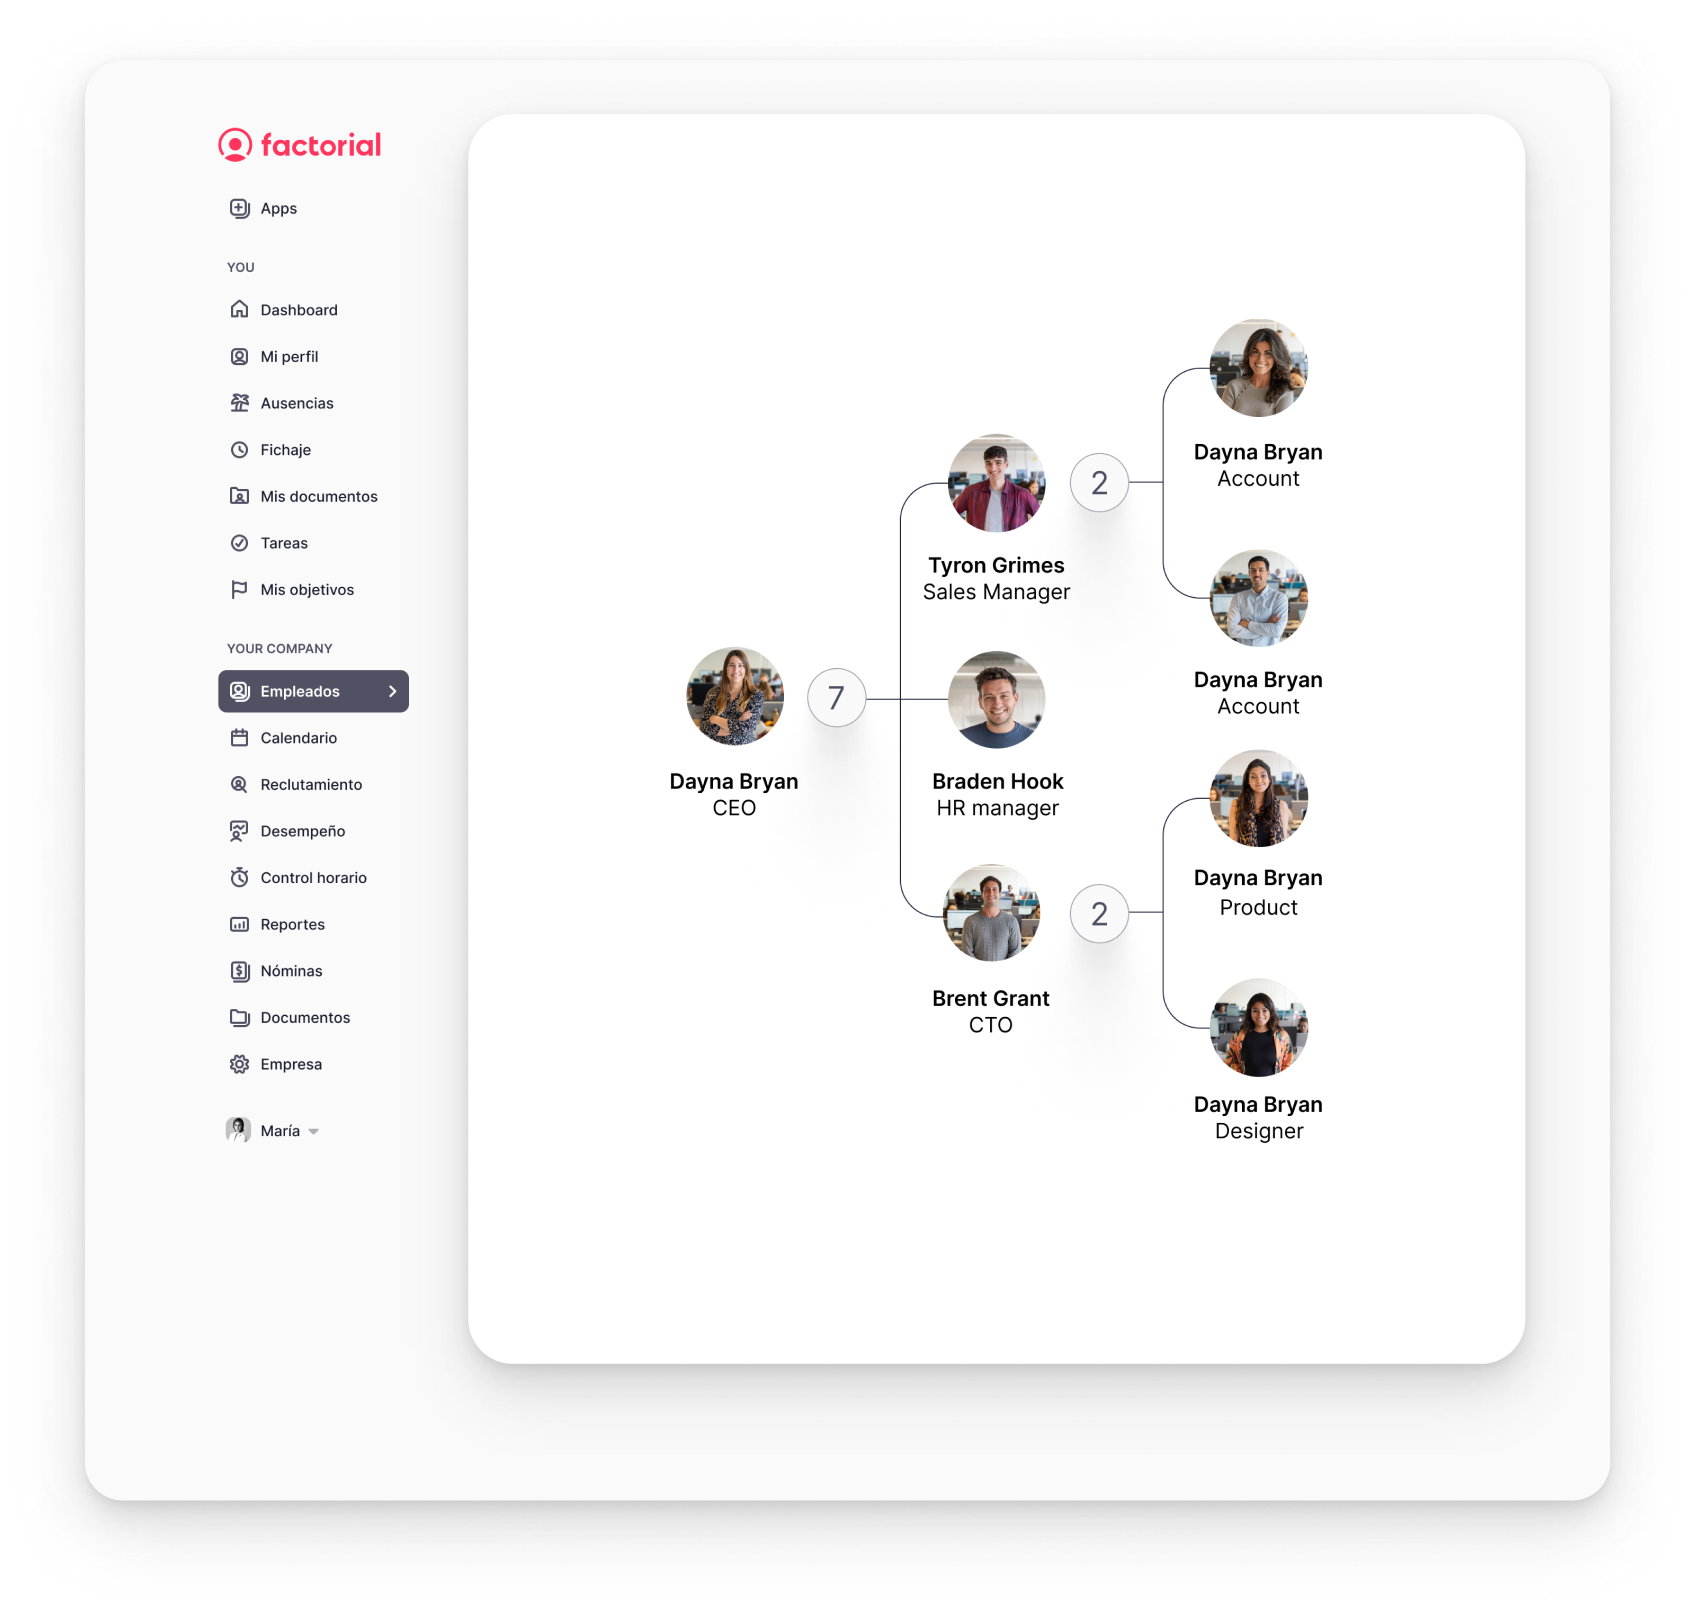 Factorial Software - The organizational chart generator collects team data and displays an accurate org chart for the company